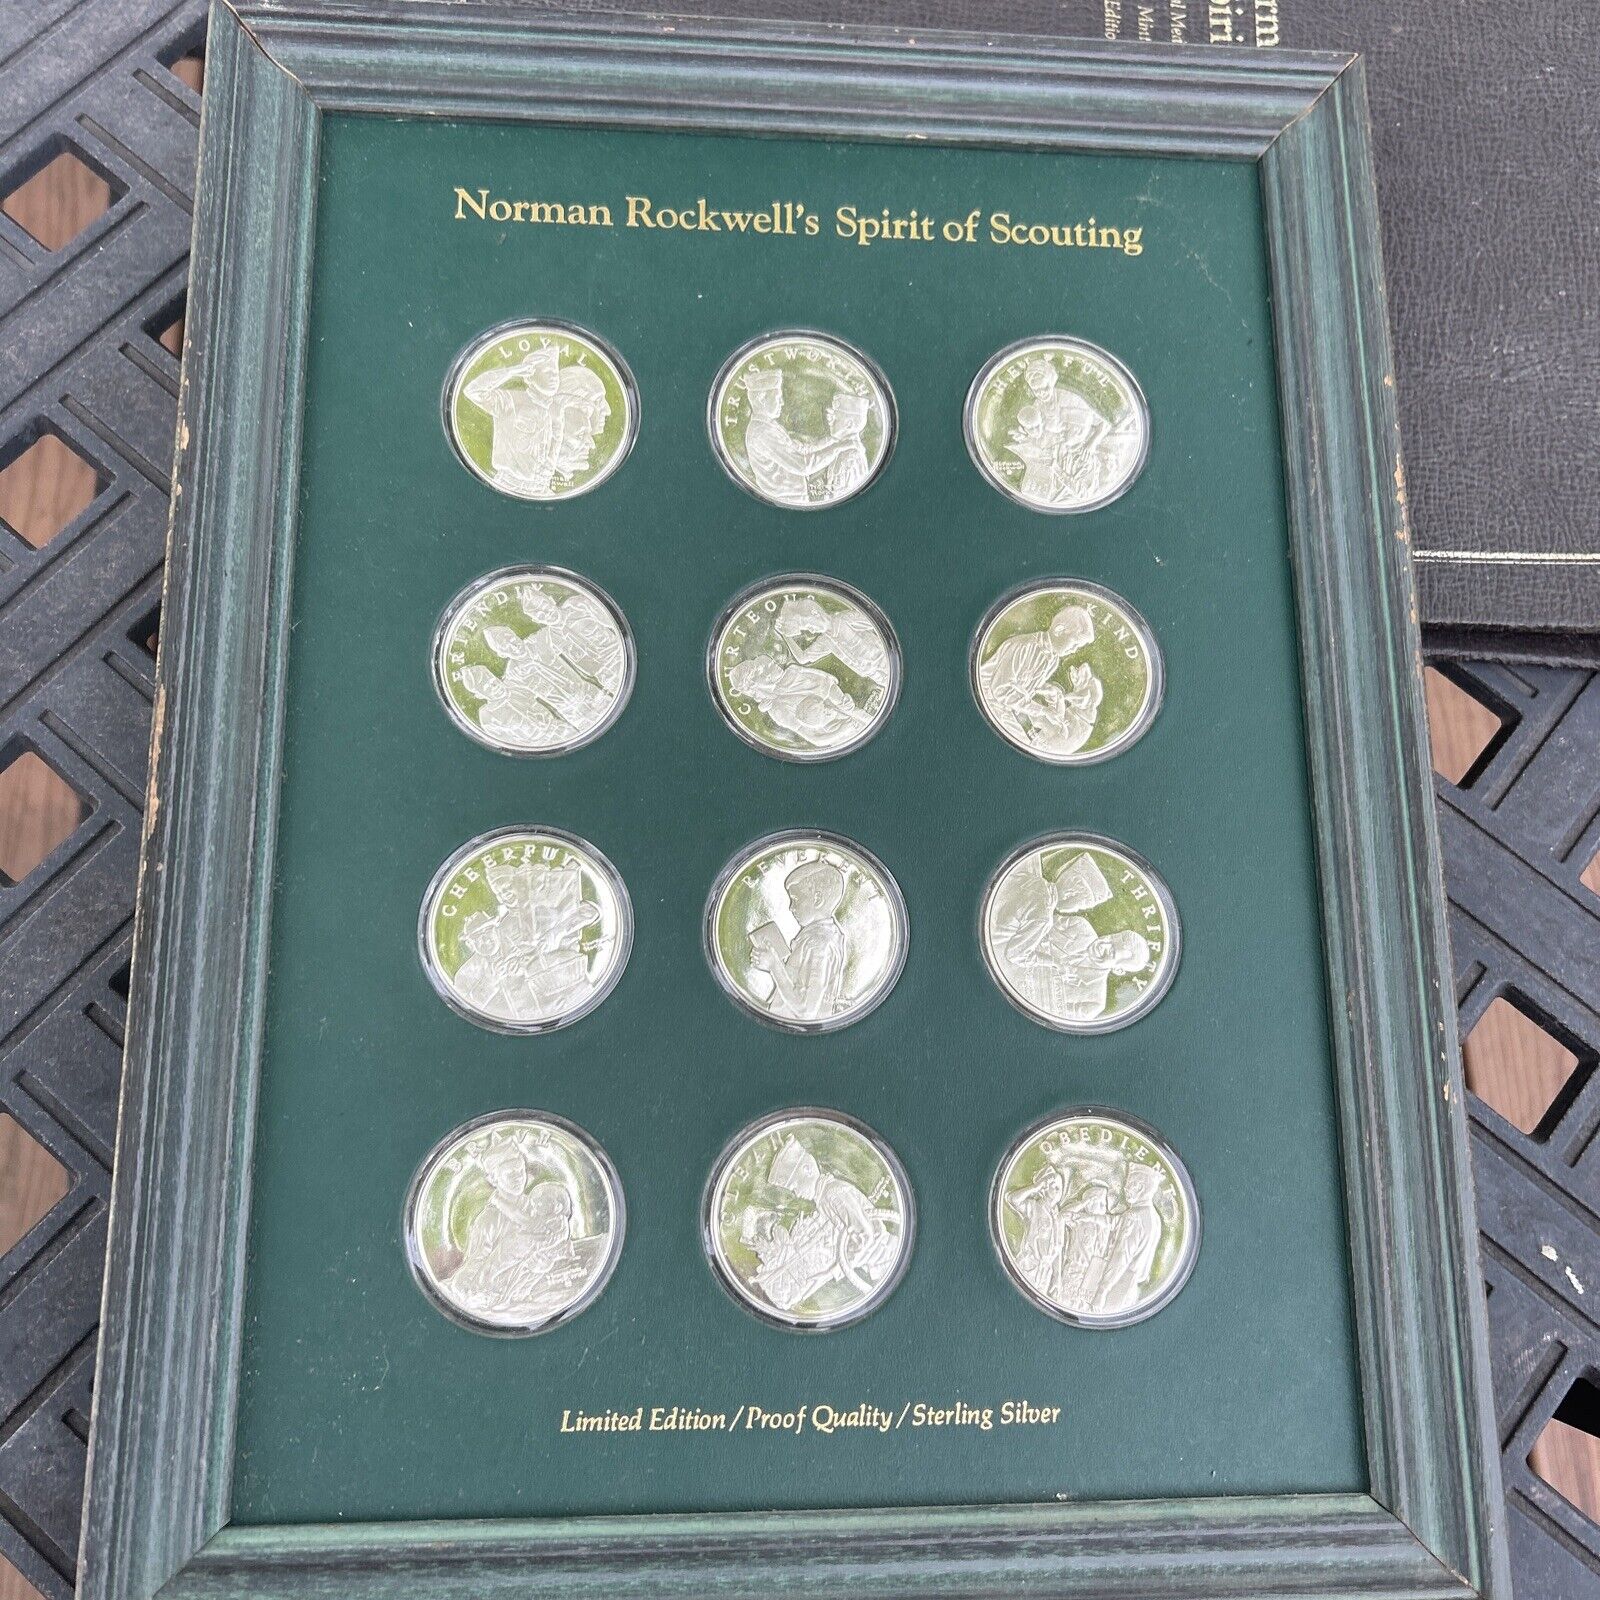 1972 Franklin Mint Norman Rockwell’s Scouting Sterling Silver Medals Set of 12